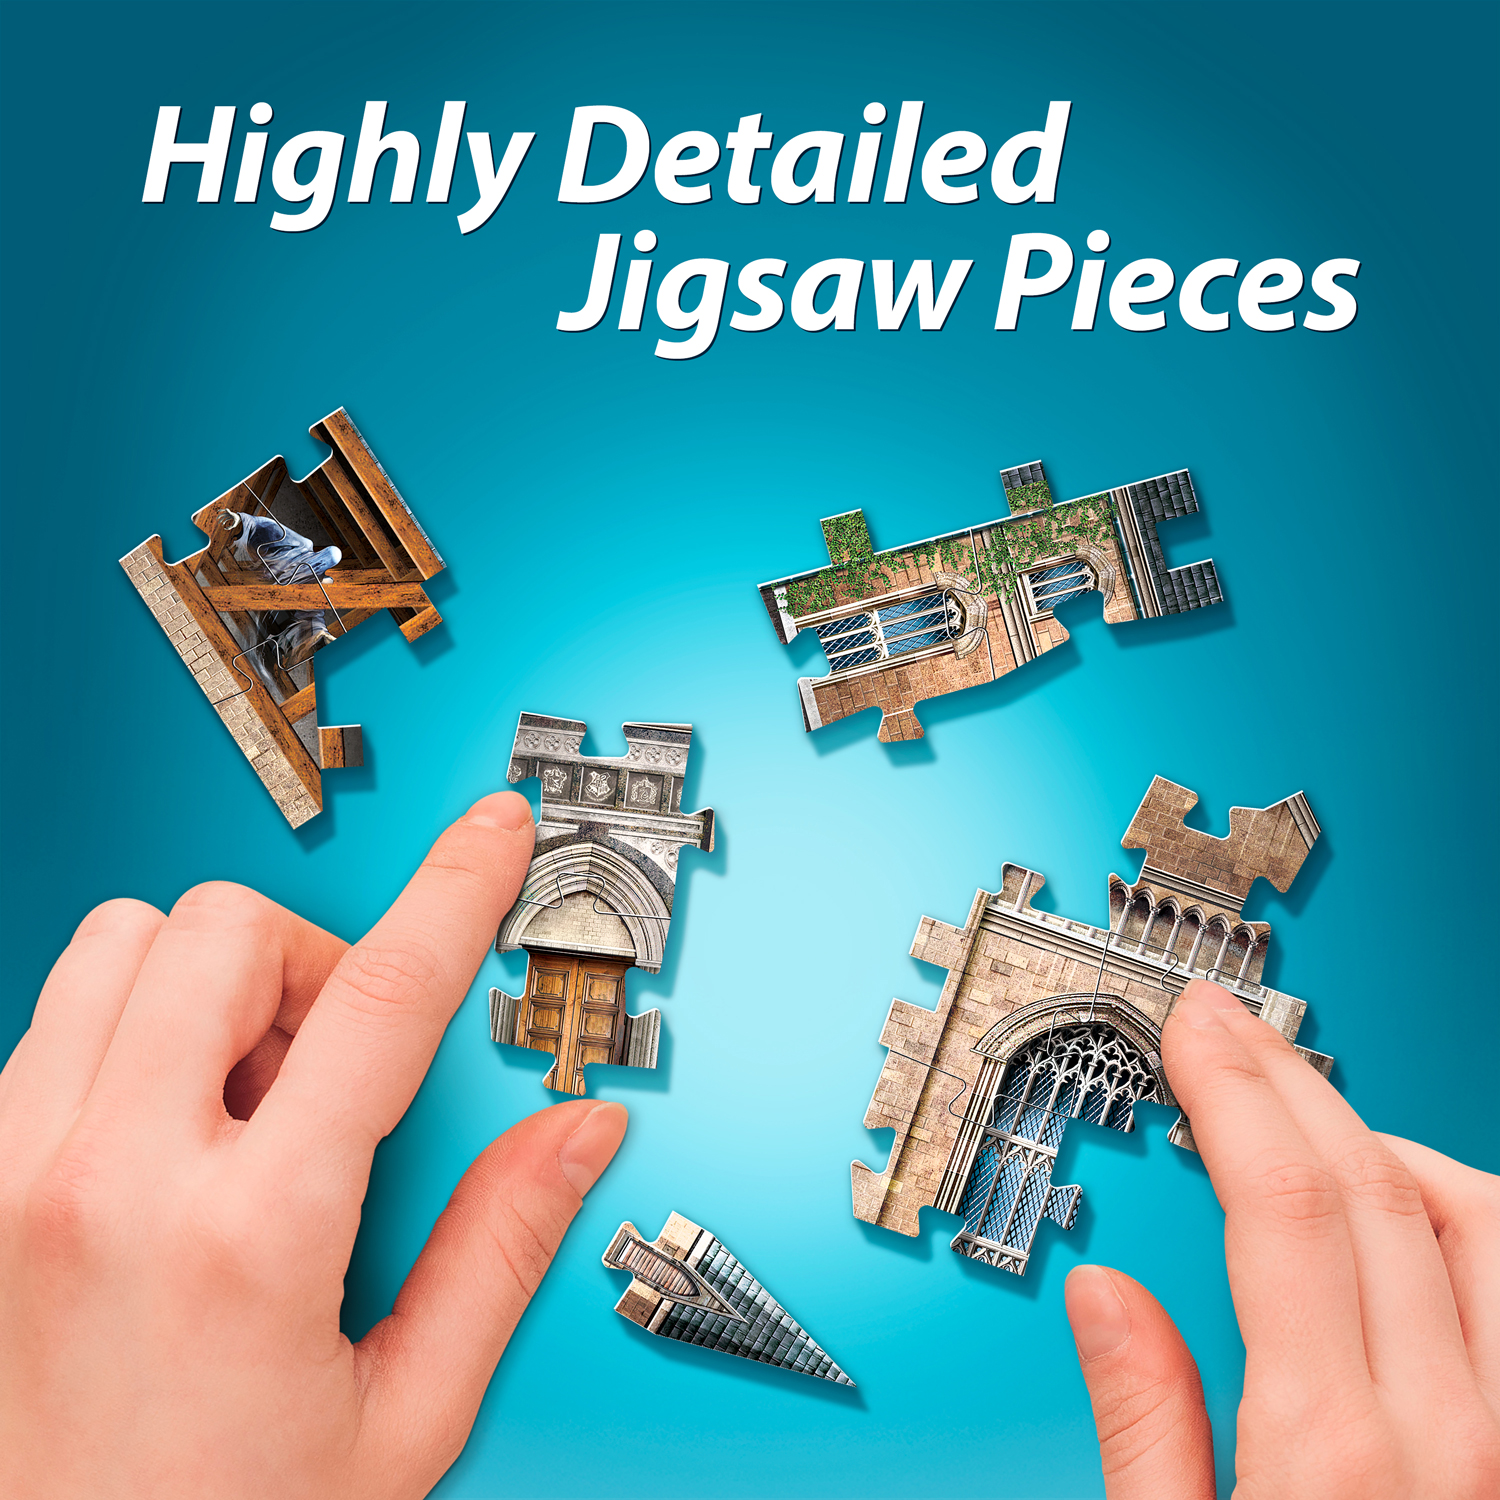 Wrebbit3d Hogwarts Castle 3D Puzzle for Teens and Adults | Great Hall  Astronomy Tower Bundle | 1725 Jigsaw Puzzle Pieces | Not Just an Ordinary  Model